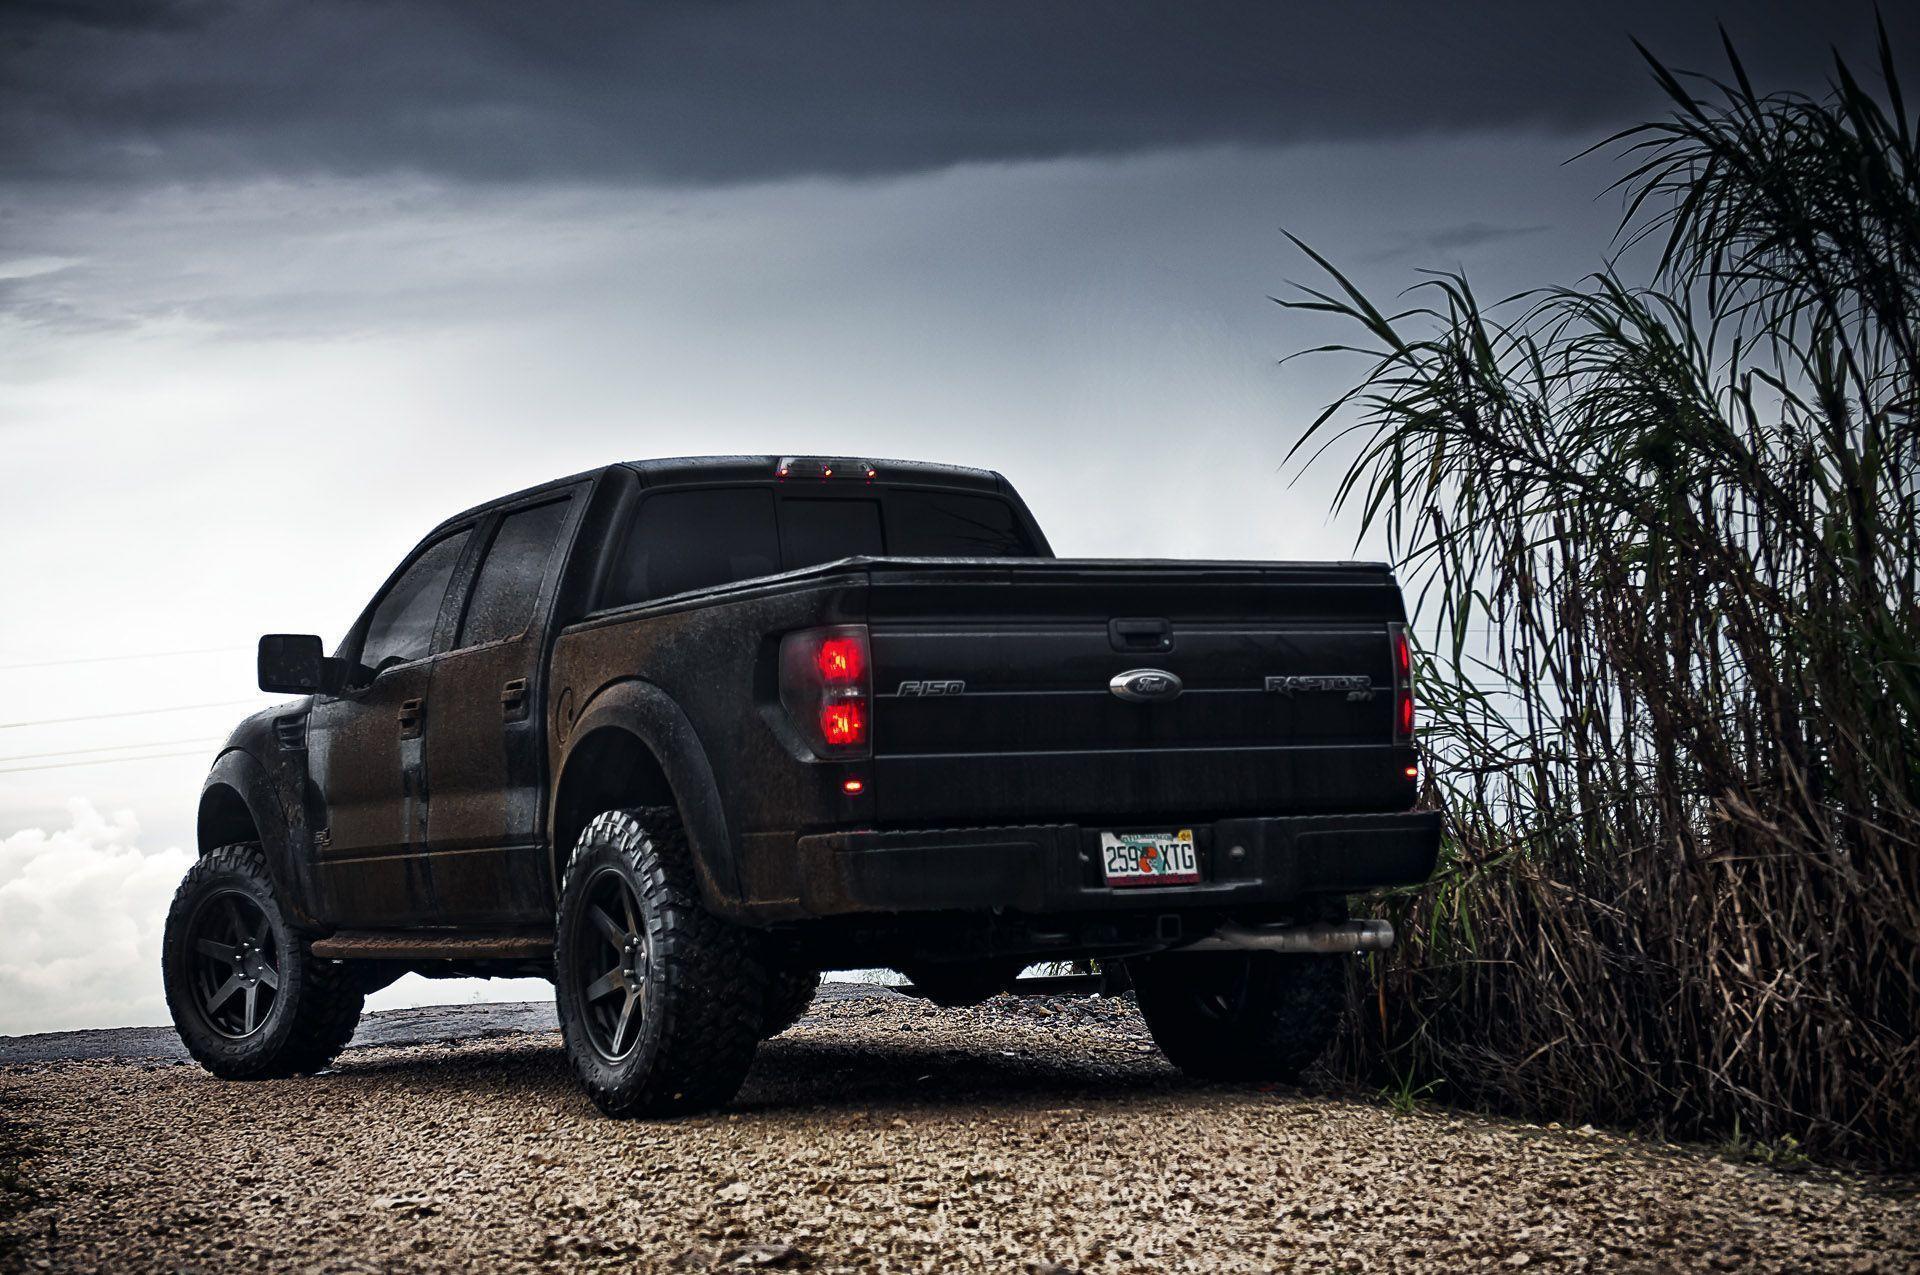 Ford F 150 Wallpaper, Download Ford F 150 HD Wallpaper for Free